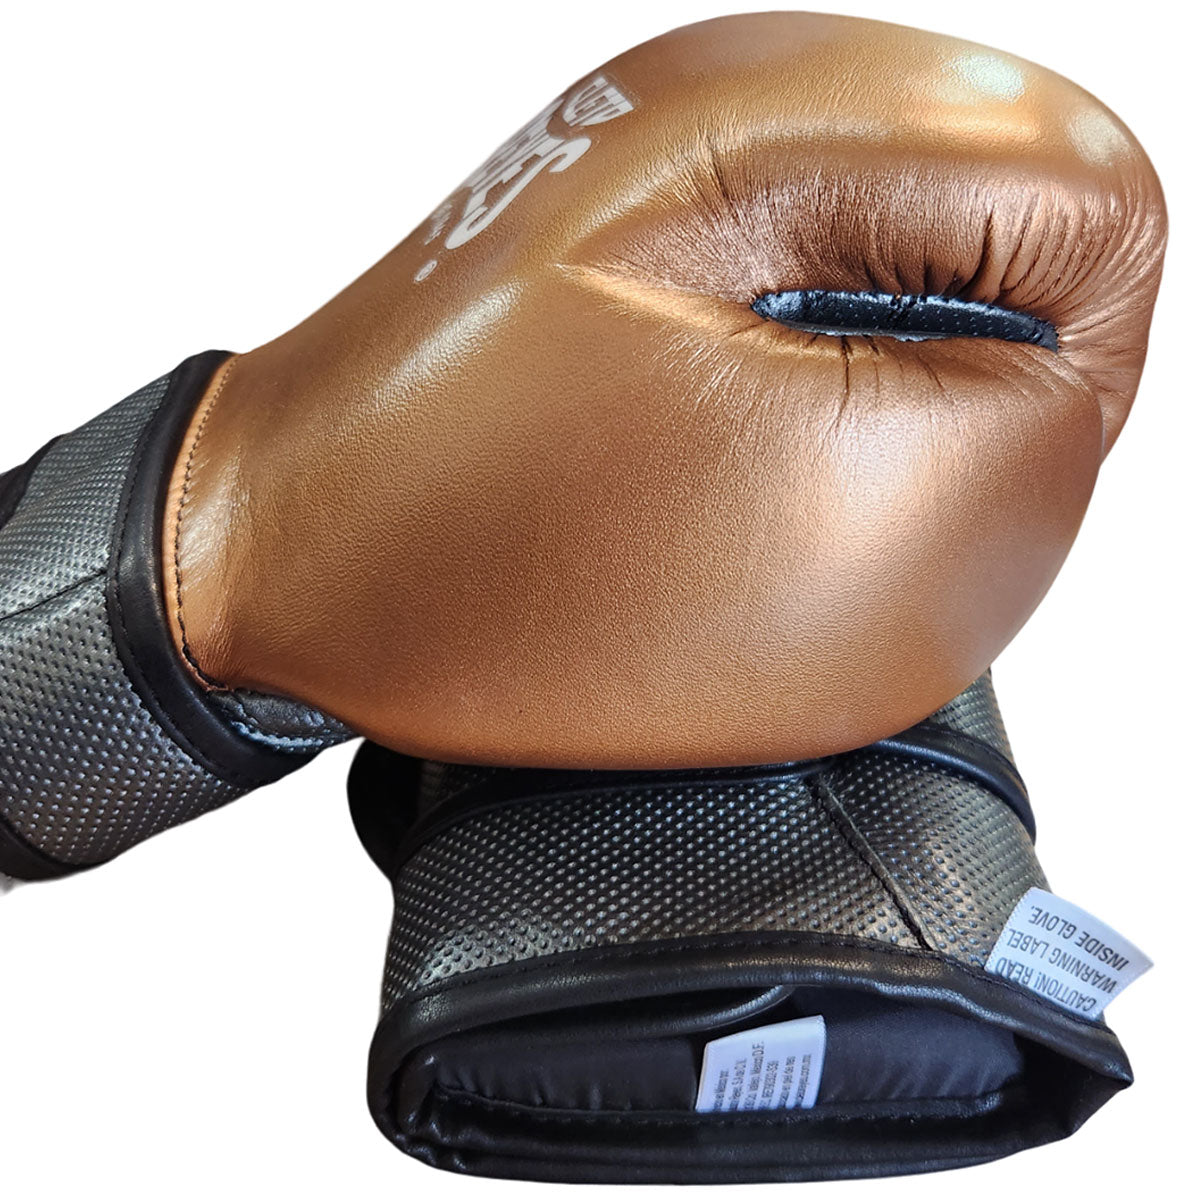 Boxing Gloves Cleto Reyes Hero Double Loop Cooper Oxford-Gray (Free Shipping)